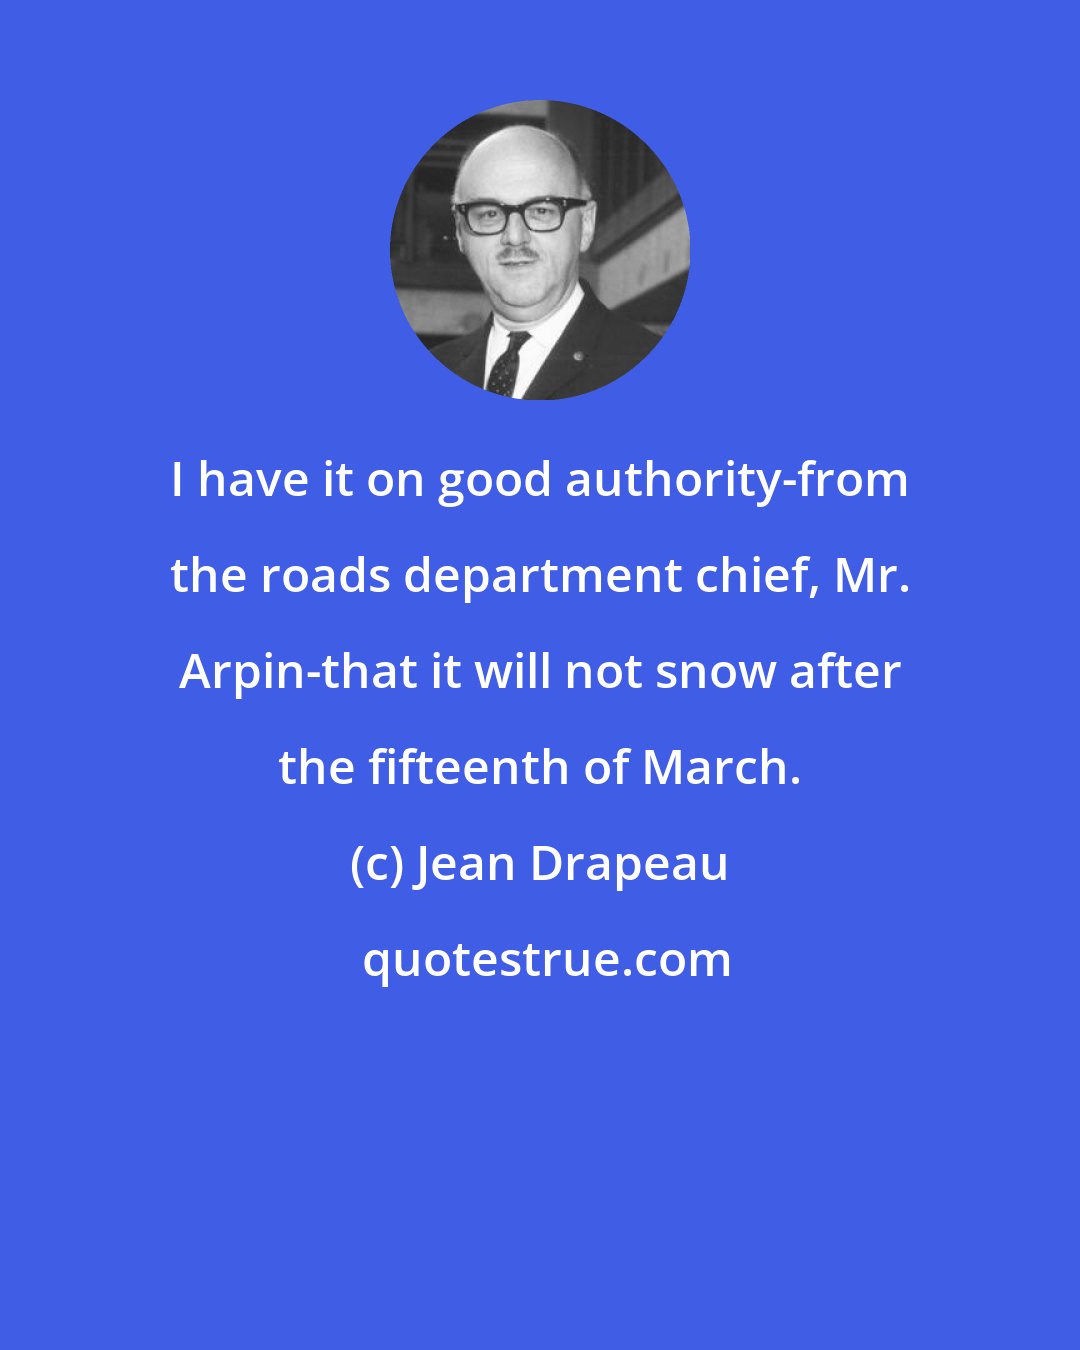 Jean Drapeau: I have it on good authority-from the roads department chief, Mr. Arpin-that it will not snow after the fifteenth of March.